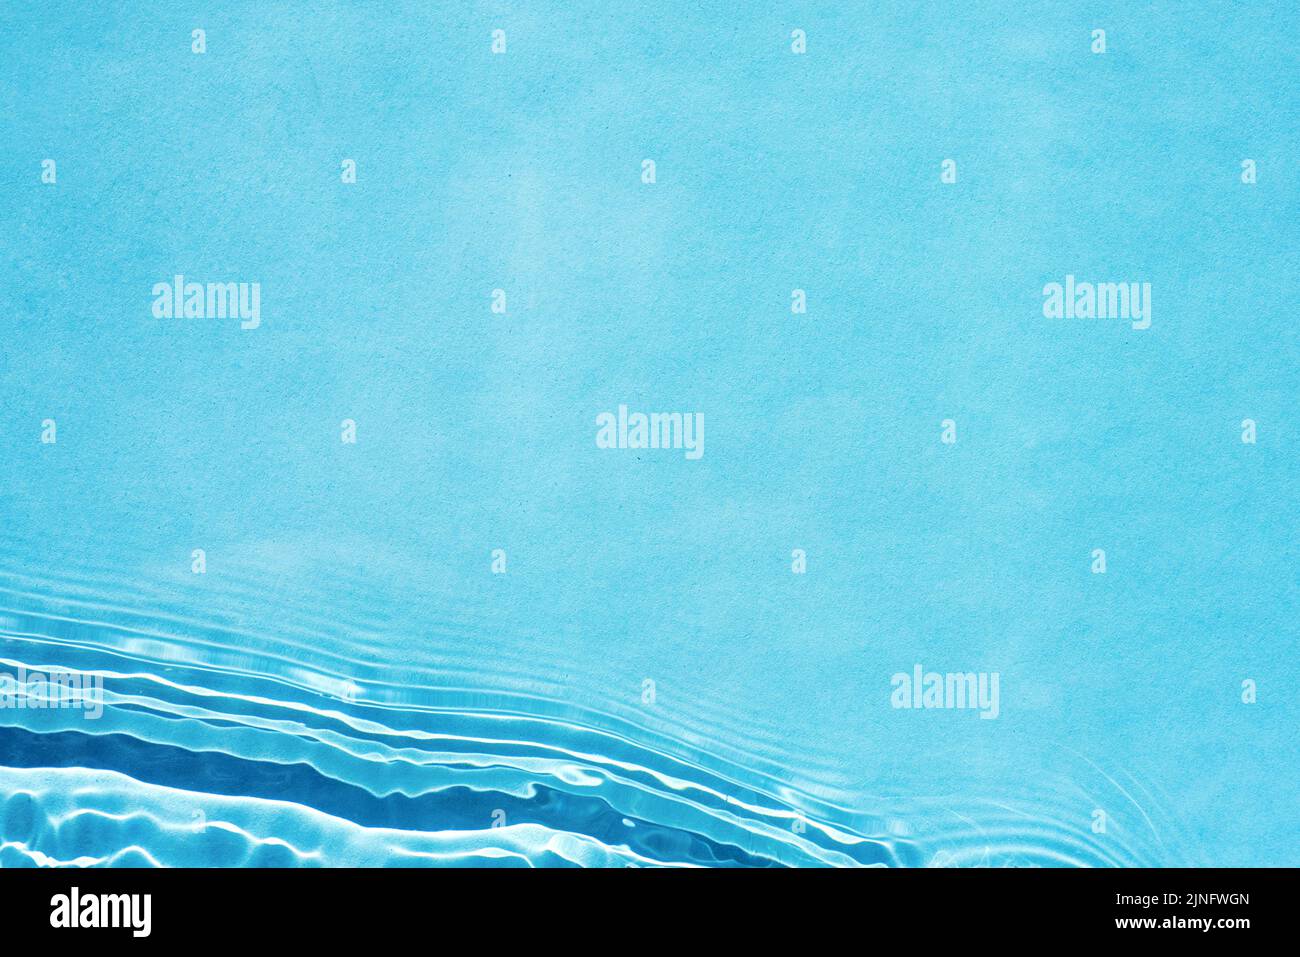 Water background. Blue water texture, blue surface with waves and ripples Stock Photo